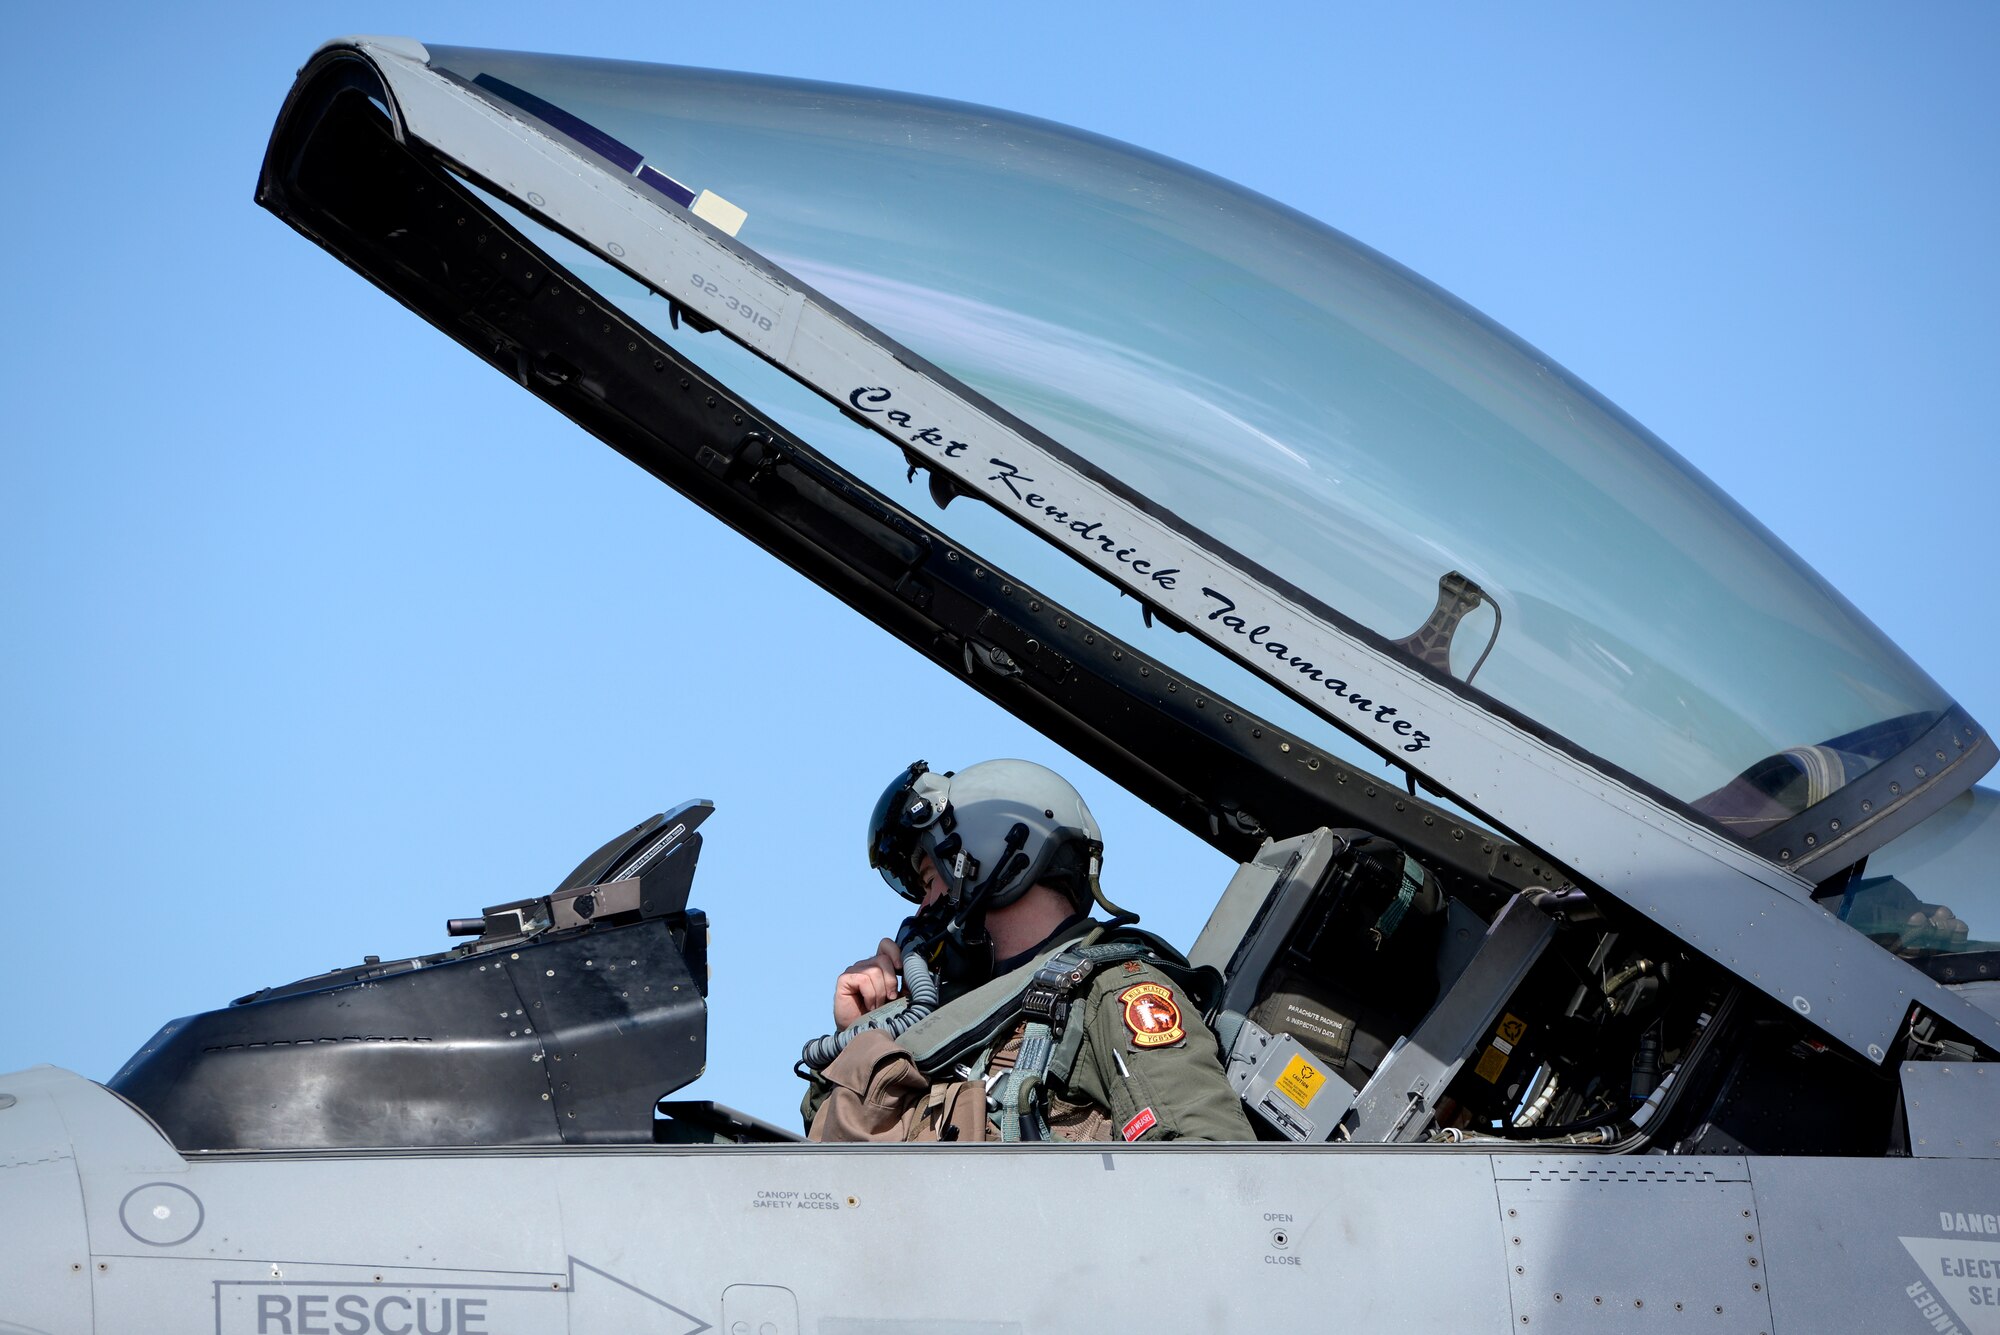 U.S. Air Force Maj. Kevin Bunten, 480th Fighter Squadron Assistant Director of Operations, prepares to fly an F-16 Fighting Falcon on a low-level training sortie at RAF Lossiemouth, Scotland, May 7, 2019, during exercise Formidable Shield. Formidable Shield is a U.S.-led exercise, conducted by Naval Striking and Support Forces NATO. The purpose of the training is to improve allied interoperability in a live-fire integrated air and missile defense exercise. (U.S. Air Force photo by Master Sgt. Austin M. May)